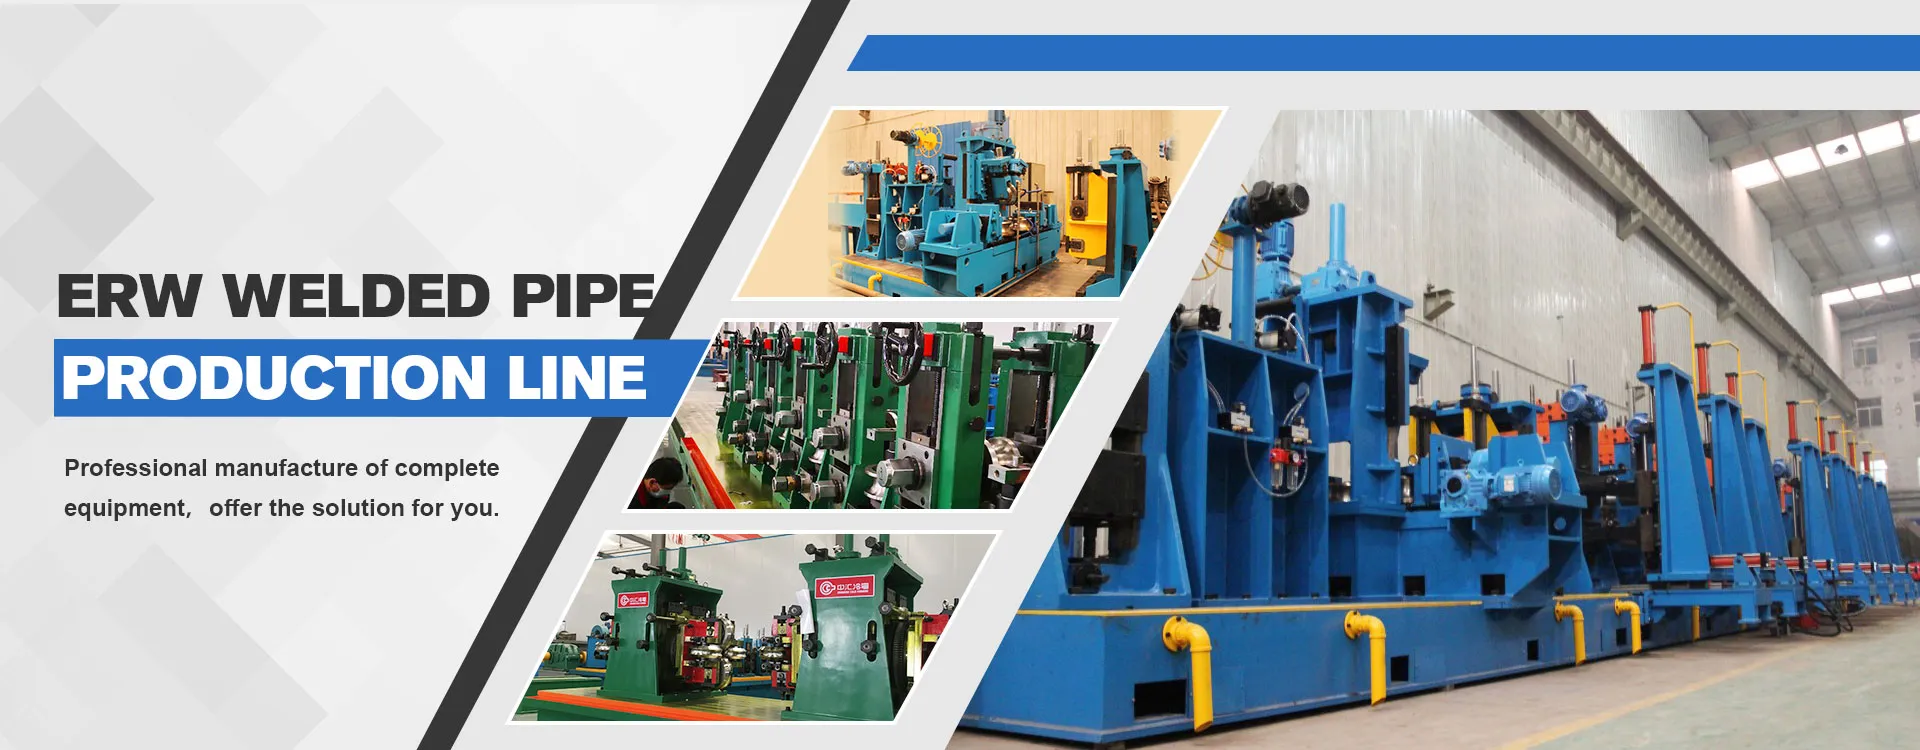 ERW Welded Pipe Production Line